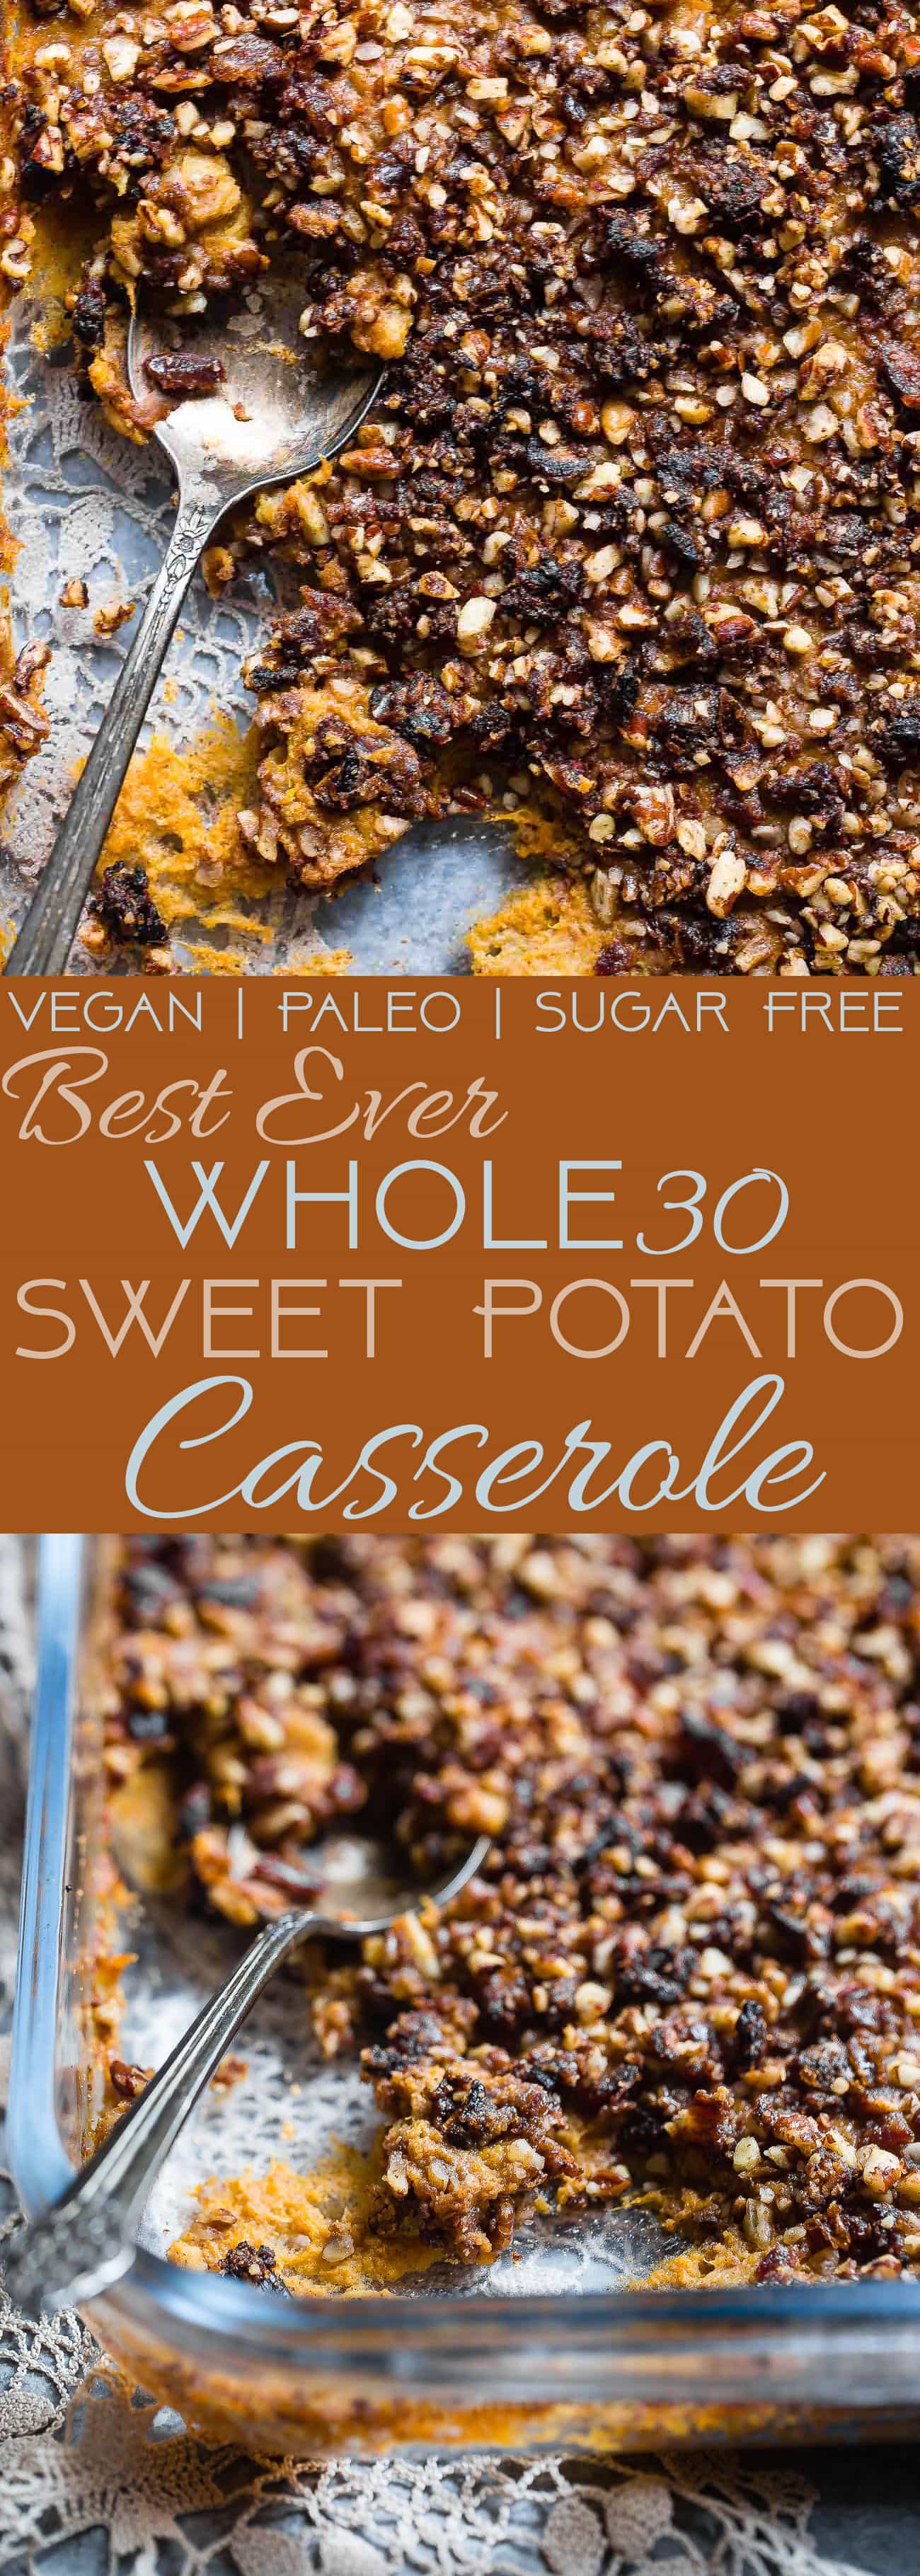 Paleo Easy Healthy Sweet Potato Casserole with Pecan Topping - the best side dish for Thanksgiving! No one will believe it's vegan friendly, whole30 compliant and gluten/grain/dairy/sugar AND egg free! | Foodfaithfitness.com | @FoodFaithFit | Vegan sweet potato casserole. whole30 sweet potato casserole. the best sweet potato casserole. sweet potato casserole recipe. gluten free sweet potato casserole. paleo sweet potato casserole. naturally sweetened sweet potato casserole. vegan side dishes. paleo side dishes. healthy comfort food.